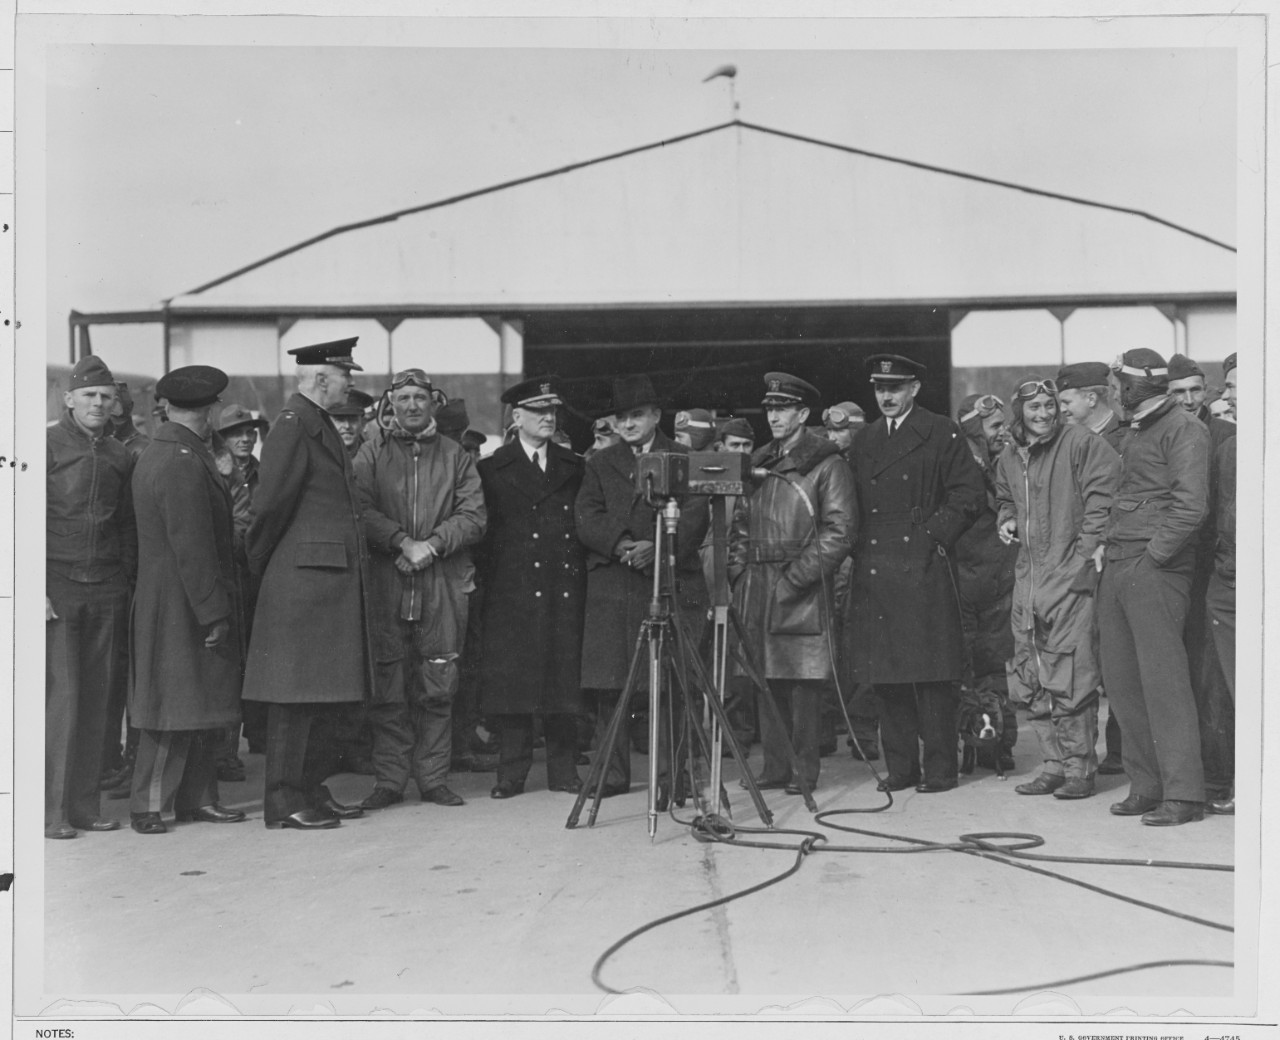 Left to right; Fuller B. H. Major General, USMC.,  Mulcahy, E.P. Capt., USMC., Moffett, W.A, Rear Admiral USN., charge d'affairs from Nicaraguan to U.S., Childs, W.G., Comdr., Comdt. Anacostia, D.C, Mueller, Louis E., Lt. Comdr., (MC).